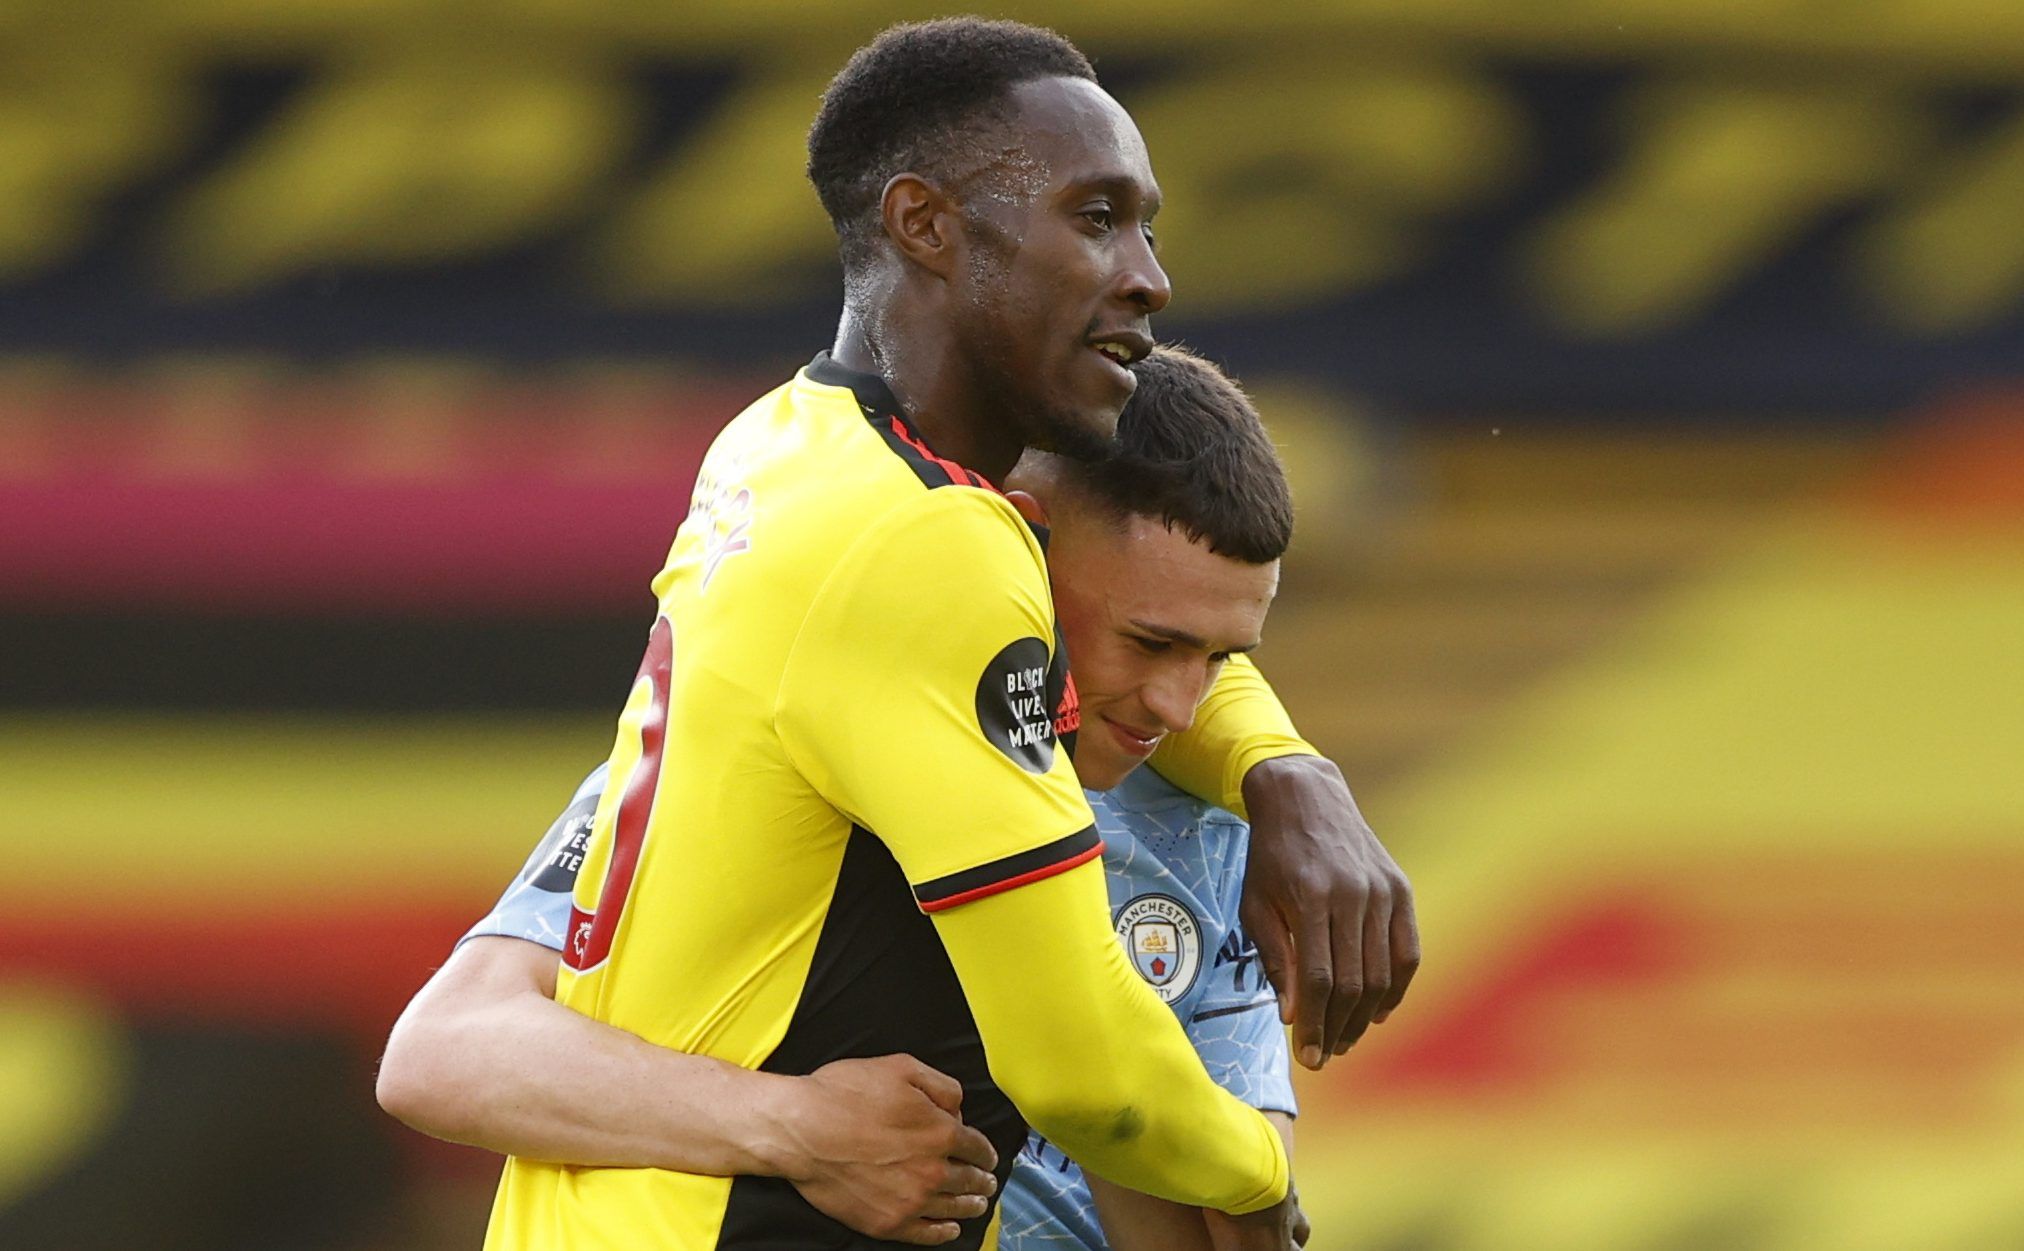 Soccer Football - Premier League - Watford v Manchester City - Vicarage Road, Watford, Britain - July 21, 2020 Manchester City's Phil Foden and Watford's Danny Welbeck after the match, as play resumes behind closed doors following the outbreak of the coronavirus disease (COVID-19) Pool via REUTERS/John Sibley EDITORIAL USE ONLY. No use with unauthorized audio, video, data, fixture lists, club/league logos or 'live' services. Online in-match use limited to 75 images, no video emulation. No use in